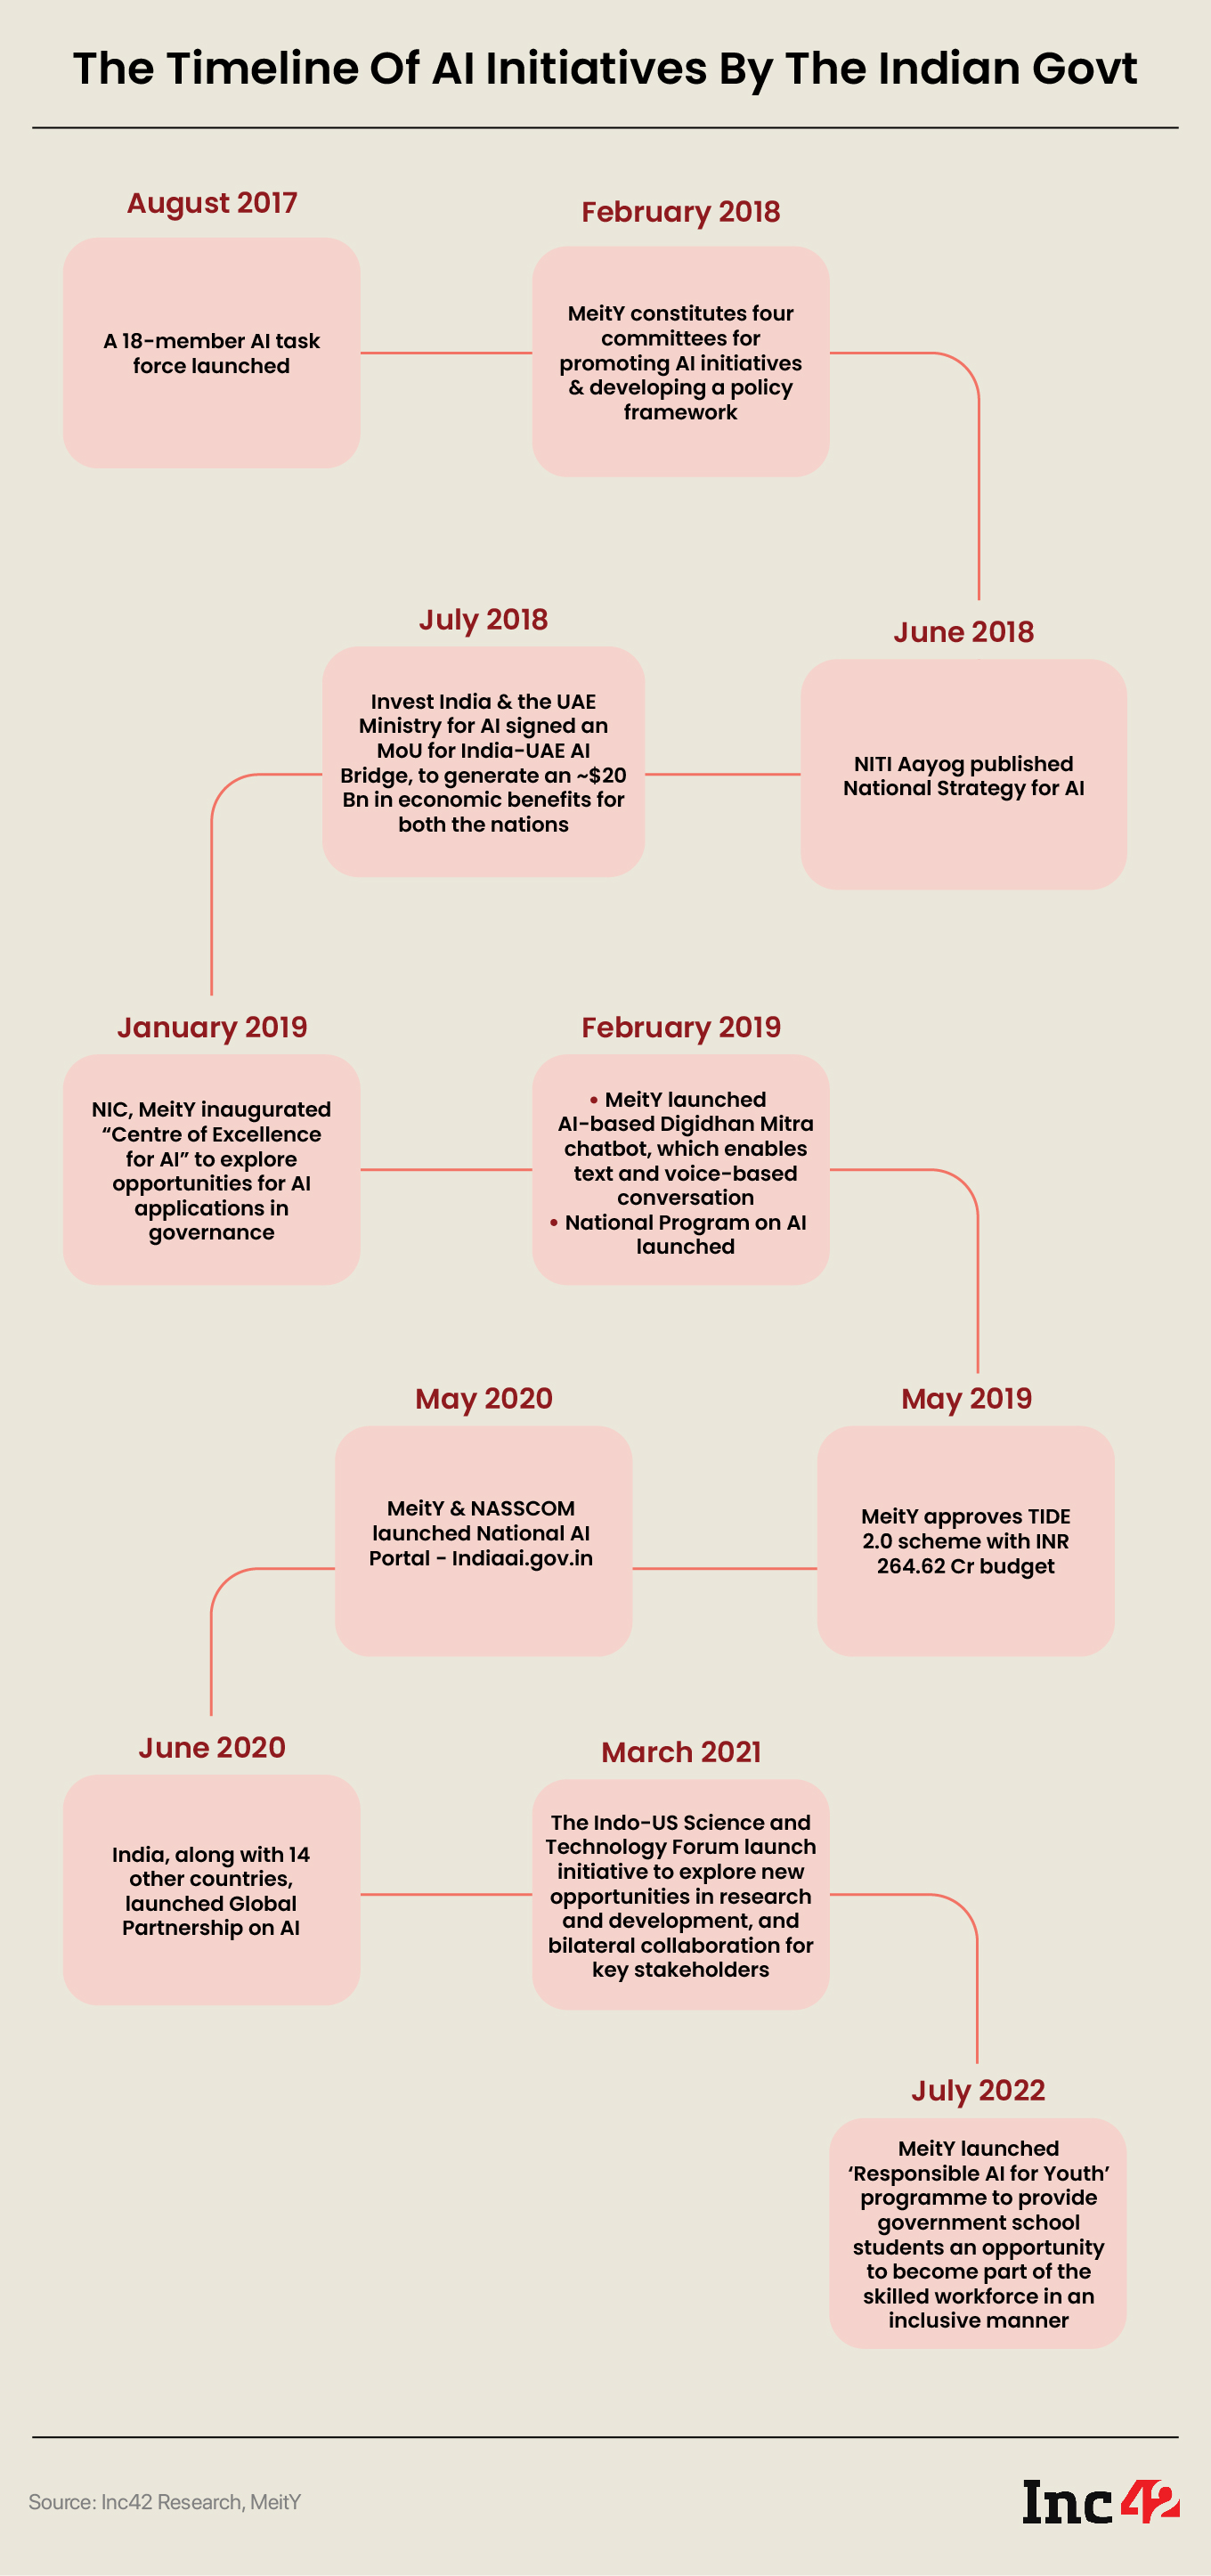 The timeline of AI initiatives by the Indian govt